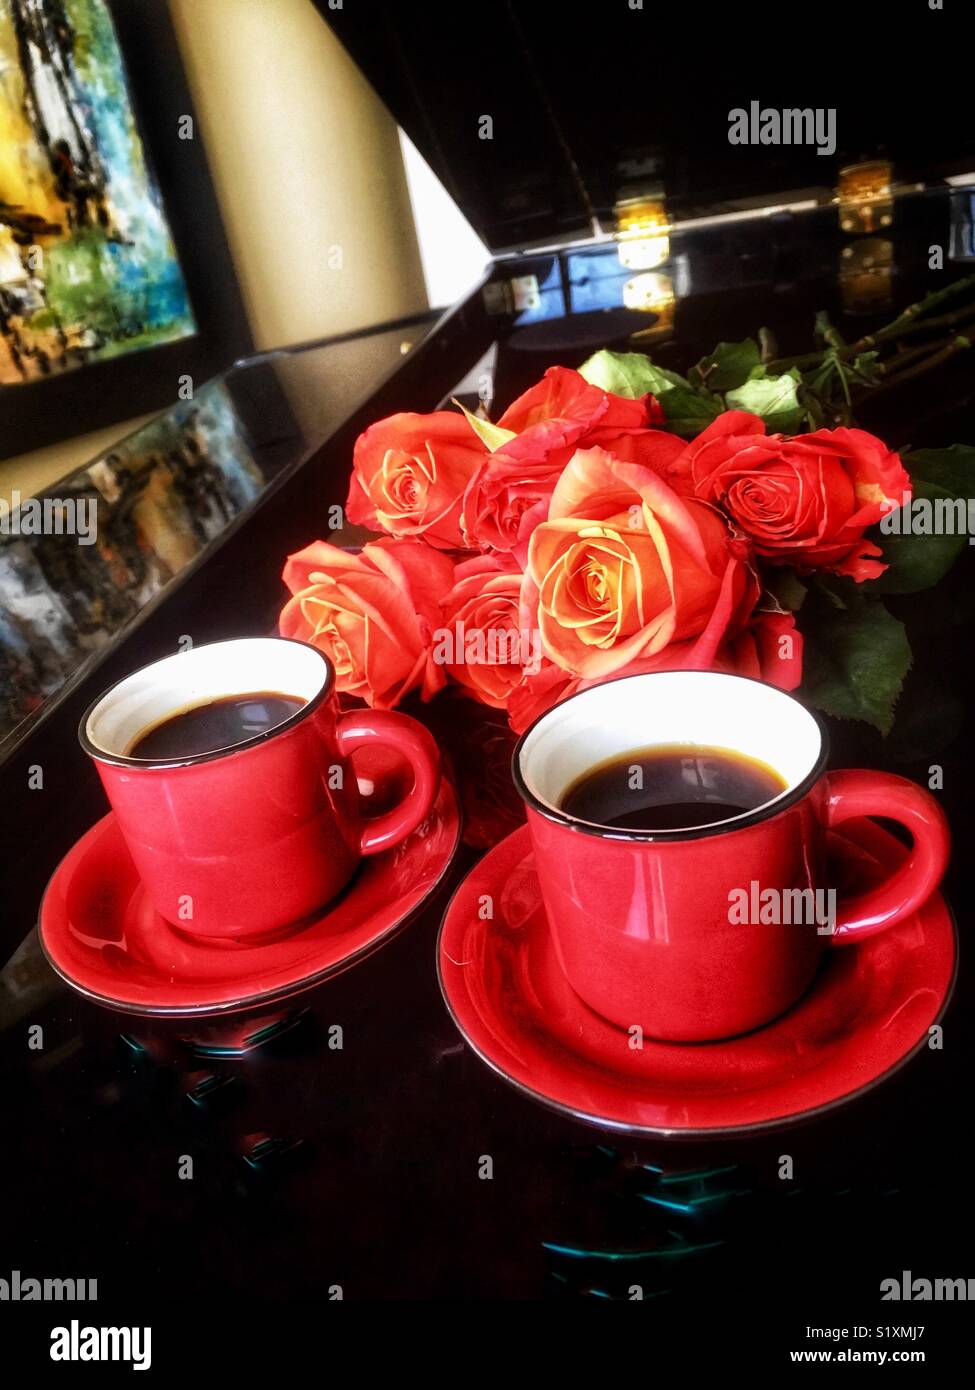 Two expresso cups with red saucers and red roses laying on black baby grand piano Stock Photo